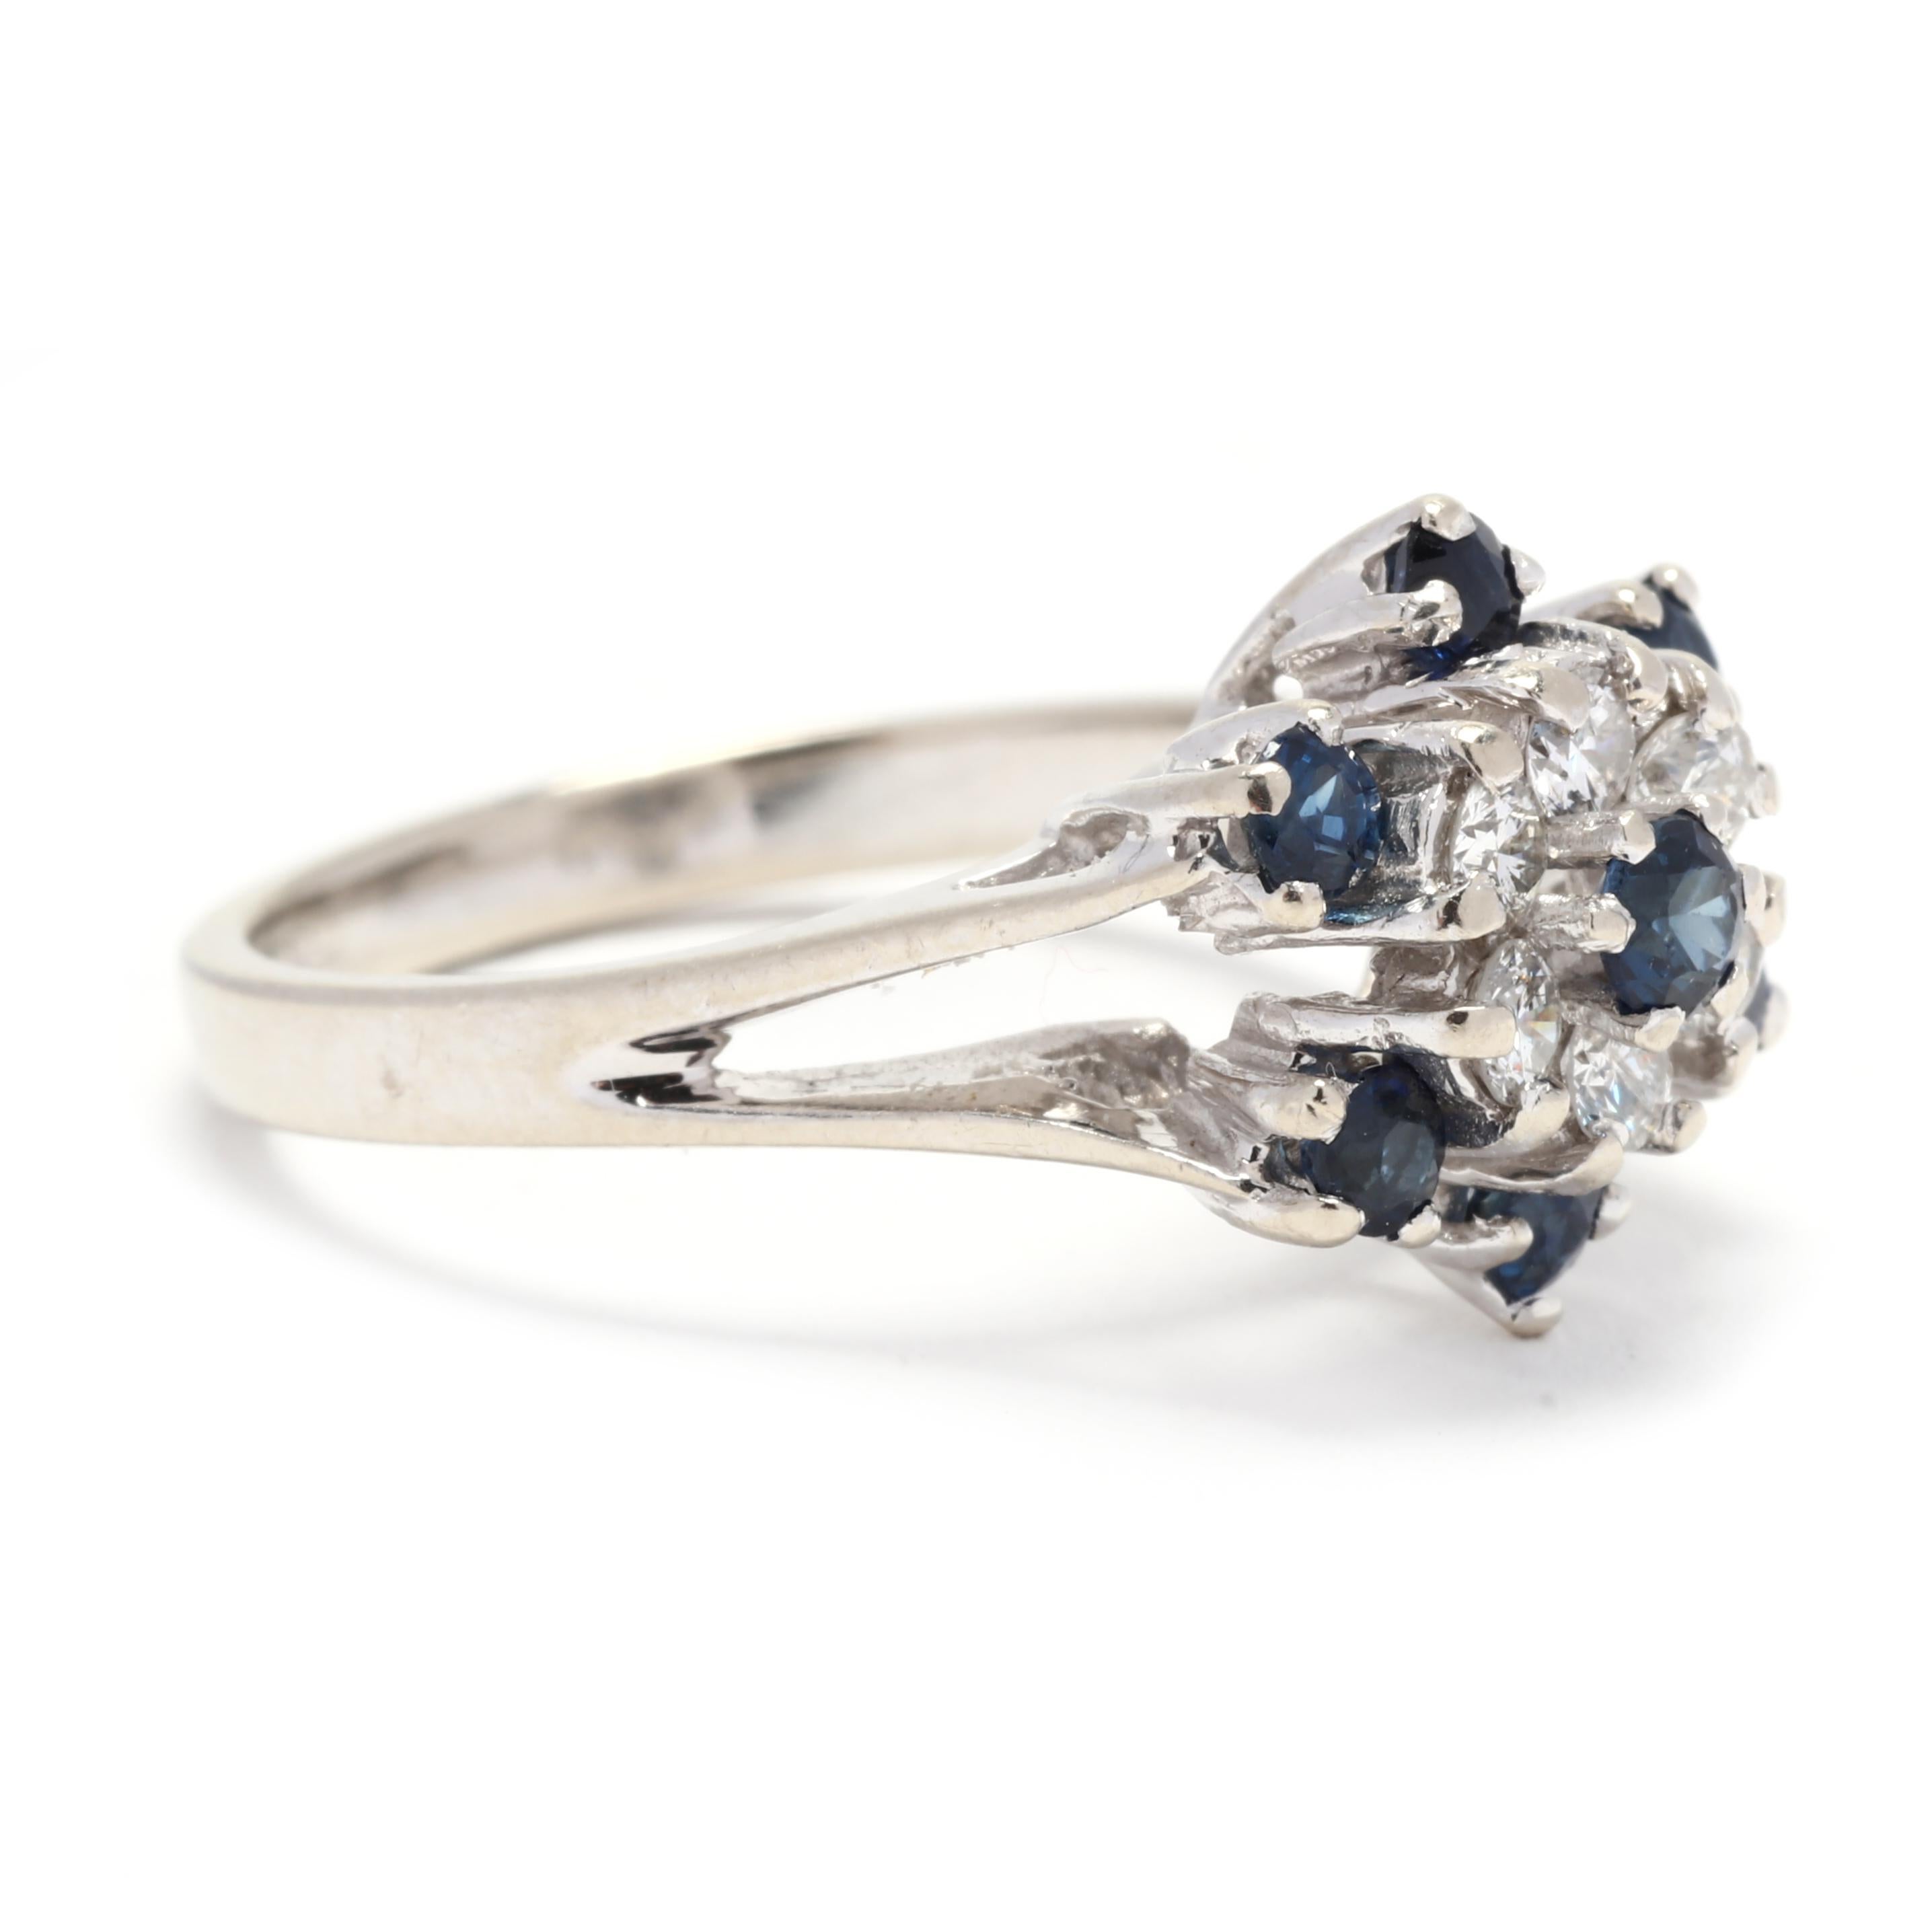 This dazzling Sapphire Diamond Cluster Cocktail Ring is a show-stopping piece of jewelry. Made with 14K white gold, this ring features a vibrant blue sapphire center stone weighing approximately 0.75 carats. Surrounding the sapphire are sparkling